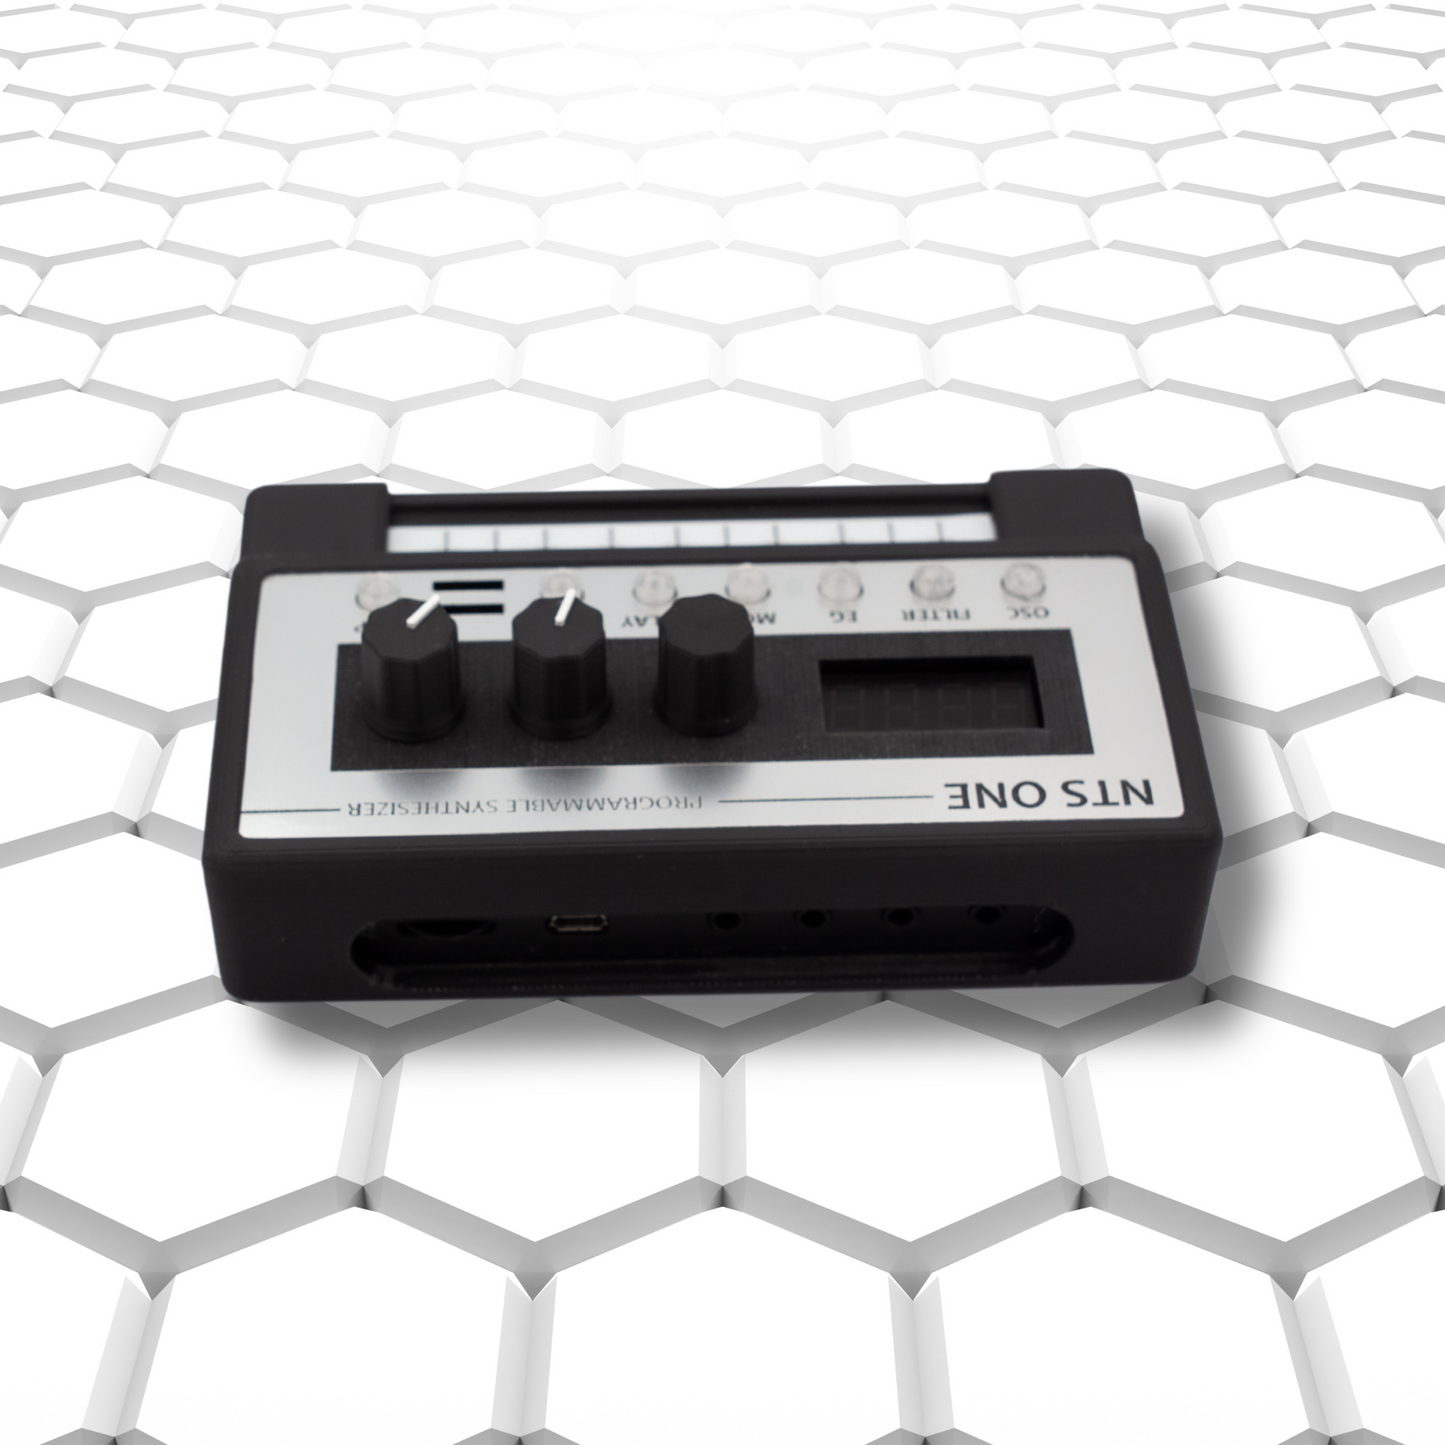 3D printed case for the Korg NTS-1 Programmable Synthesizer